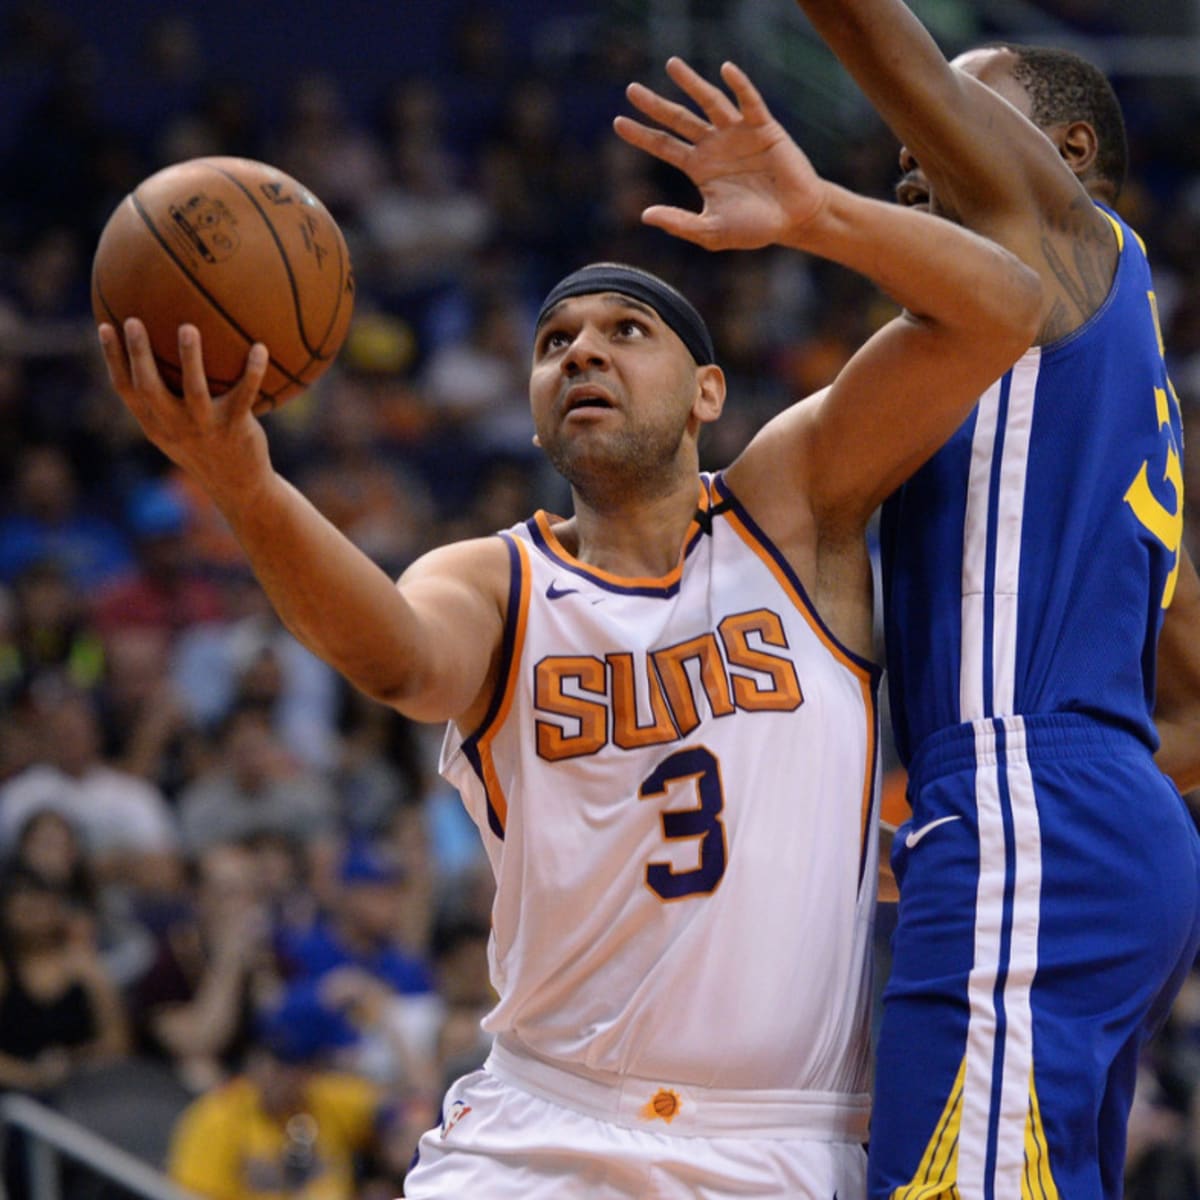 Suns' Jared Dudley is worth every penny of his $30 million deal